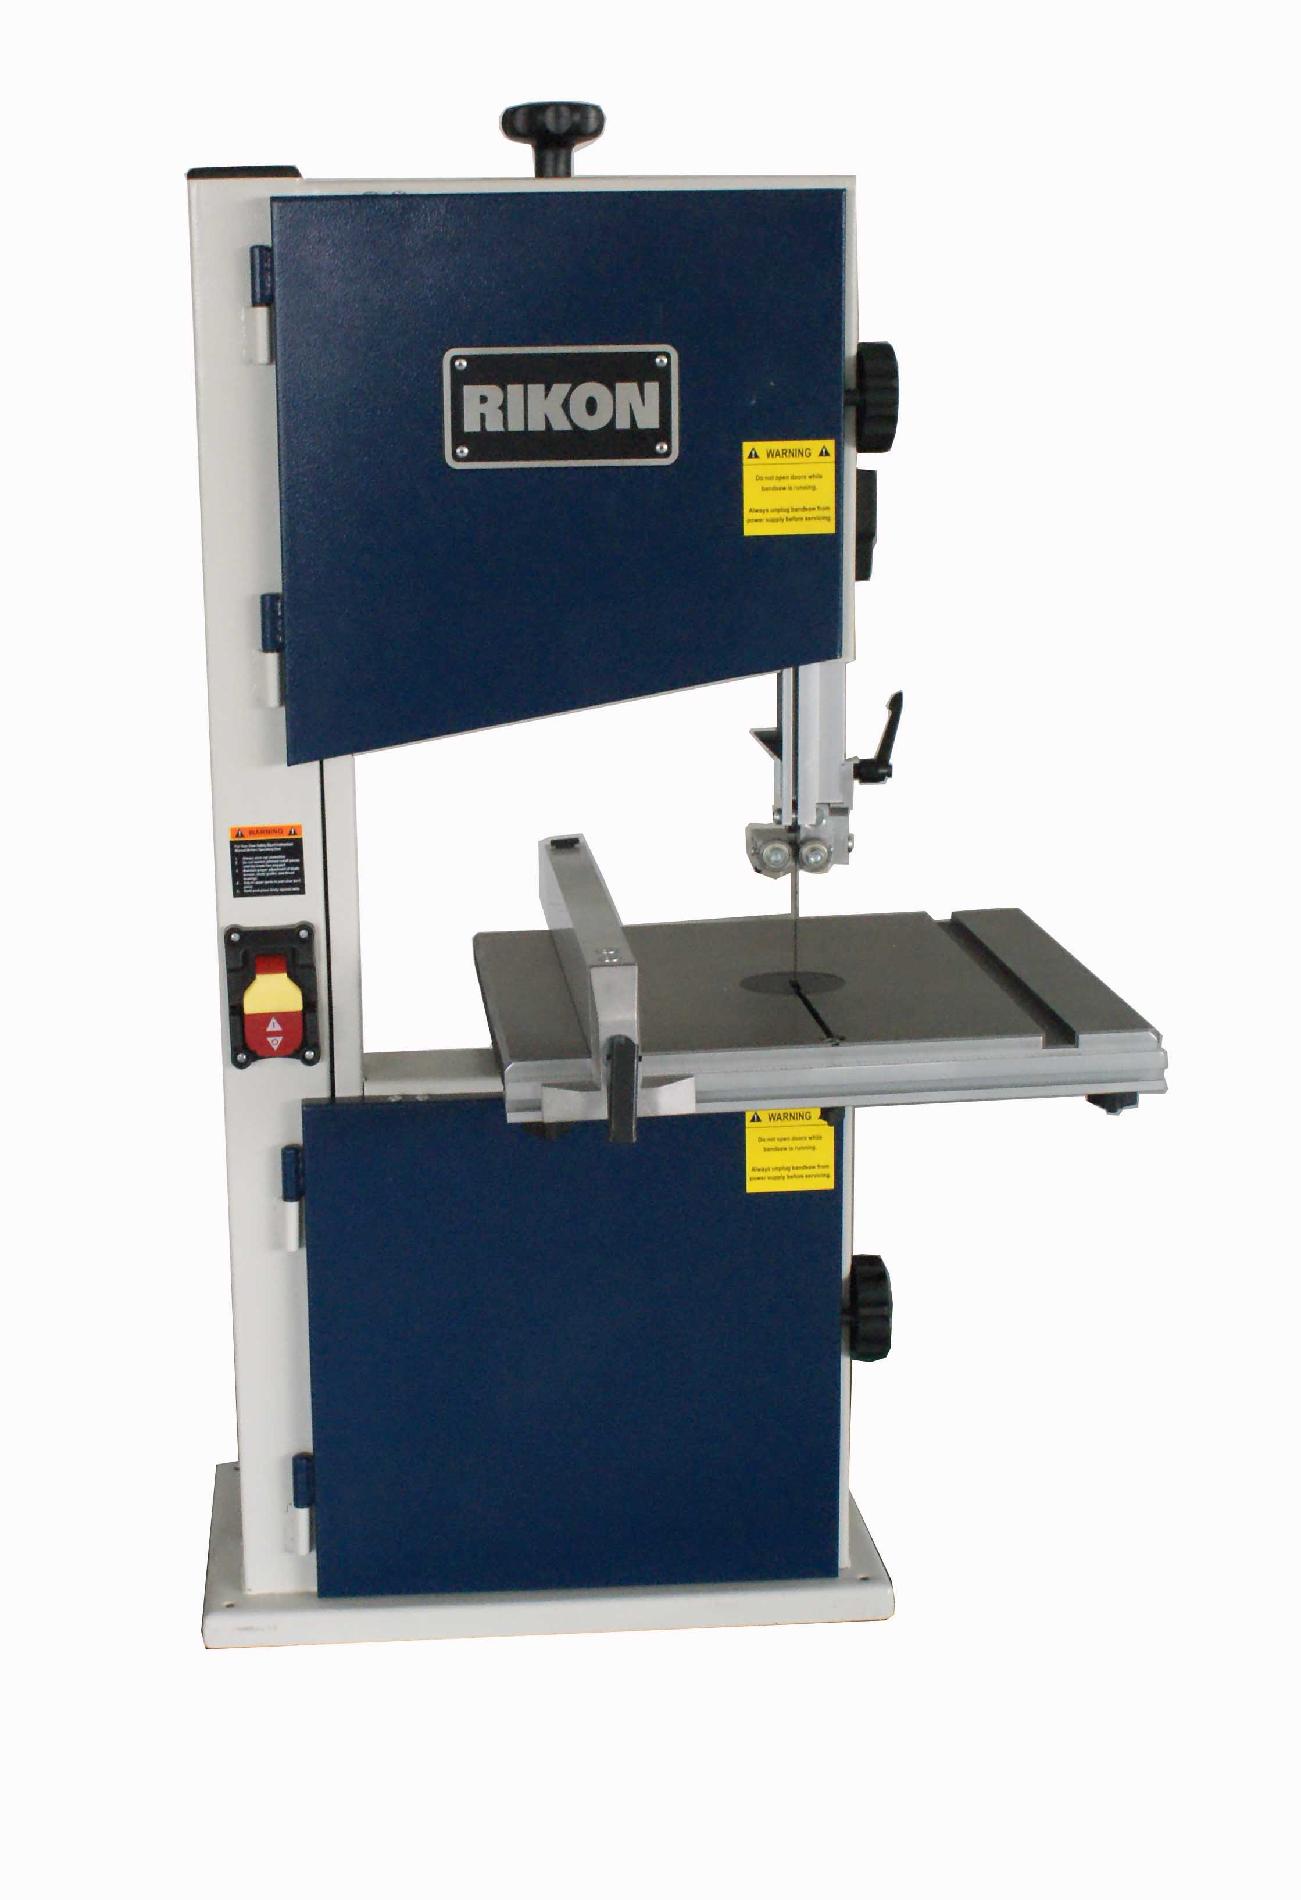 RIKON Power Tools 10-Inch Band Saw w/ Fence 1/3 HP | Shop Your Way